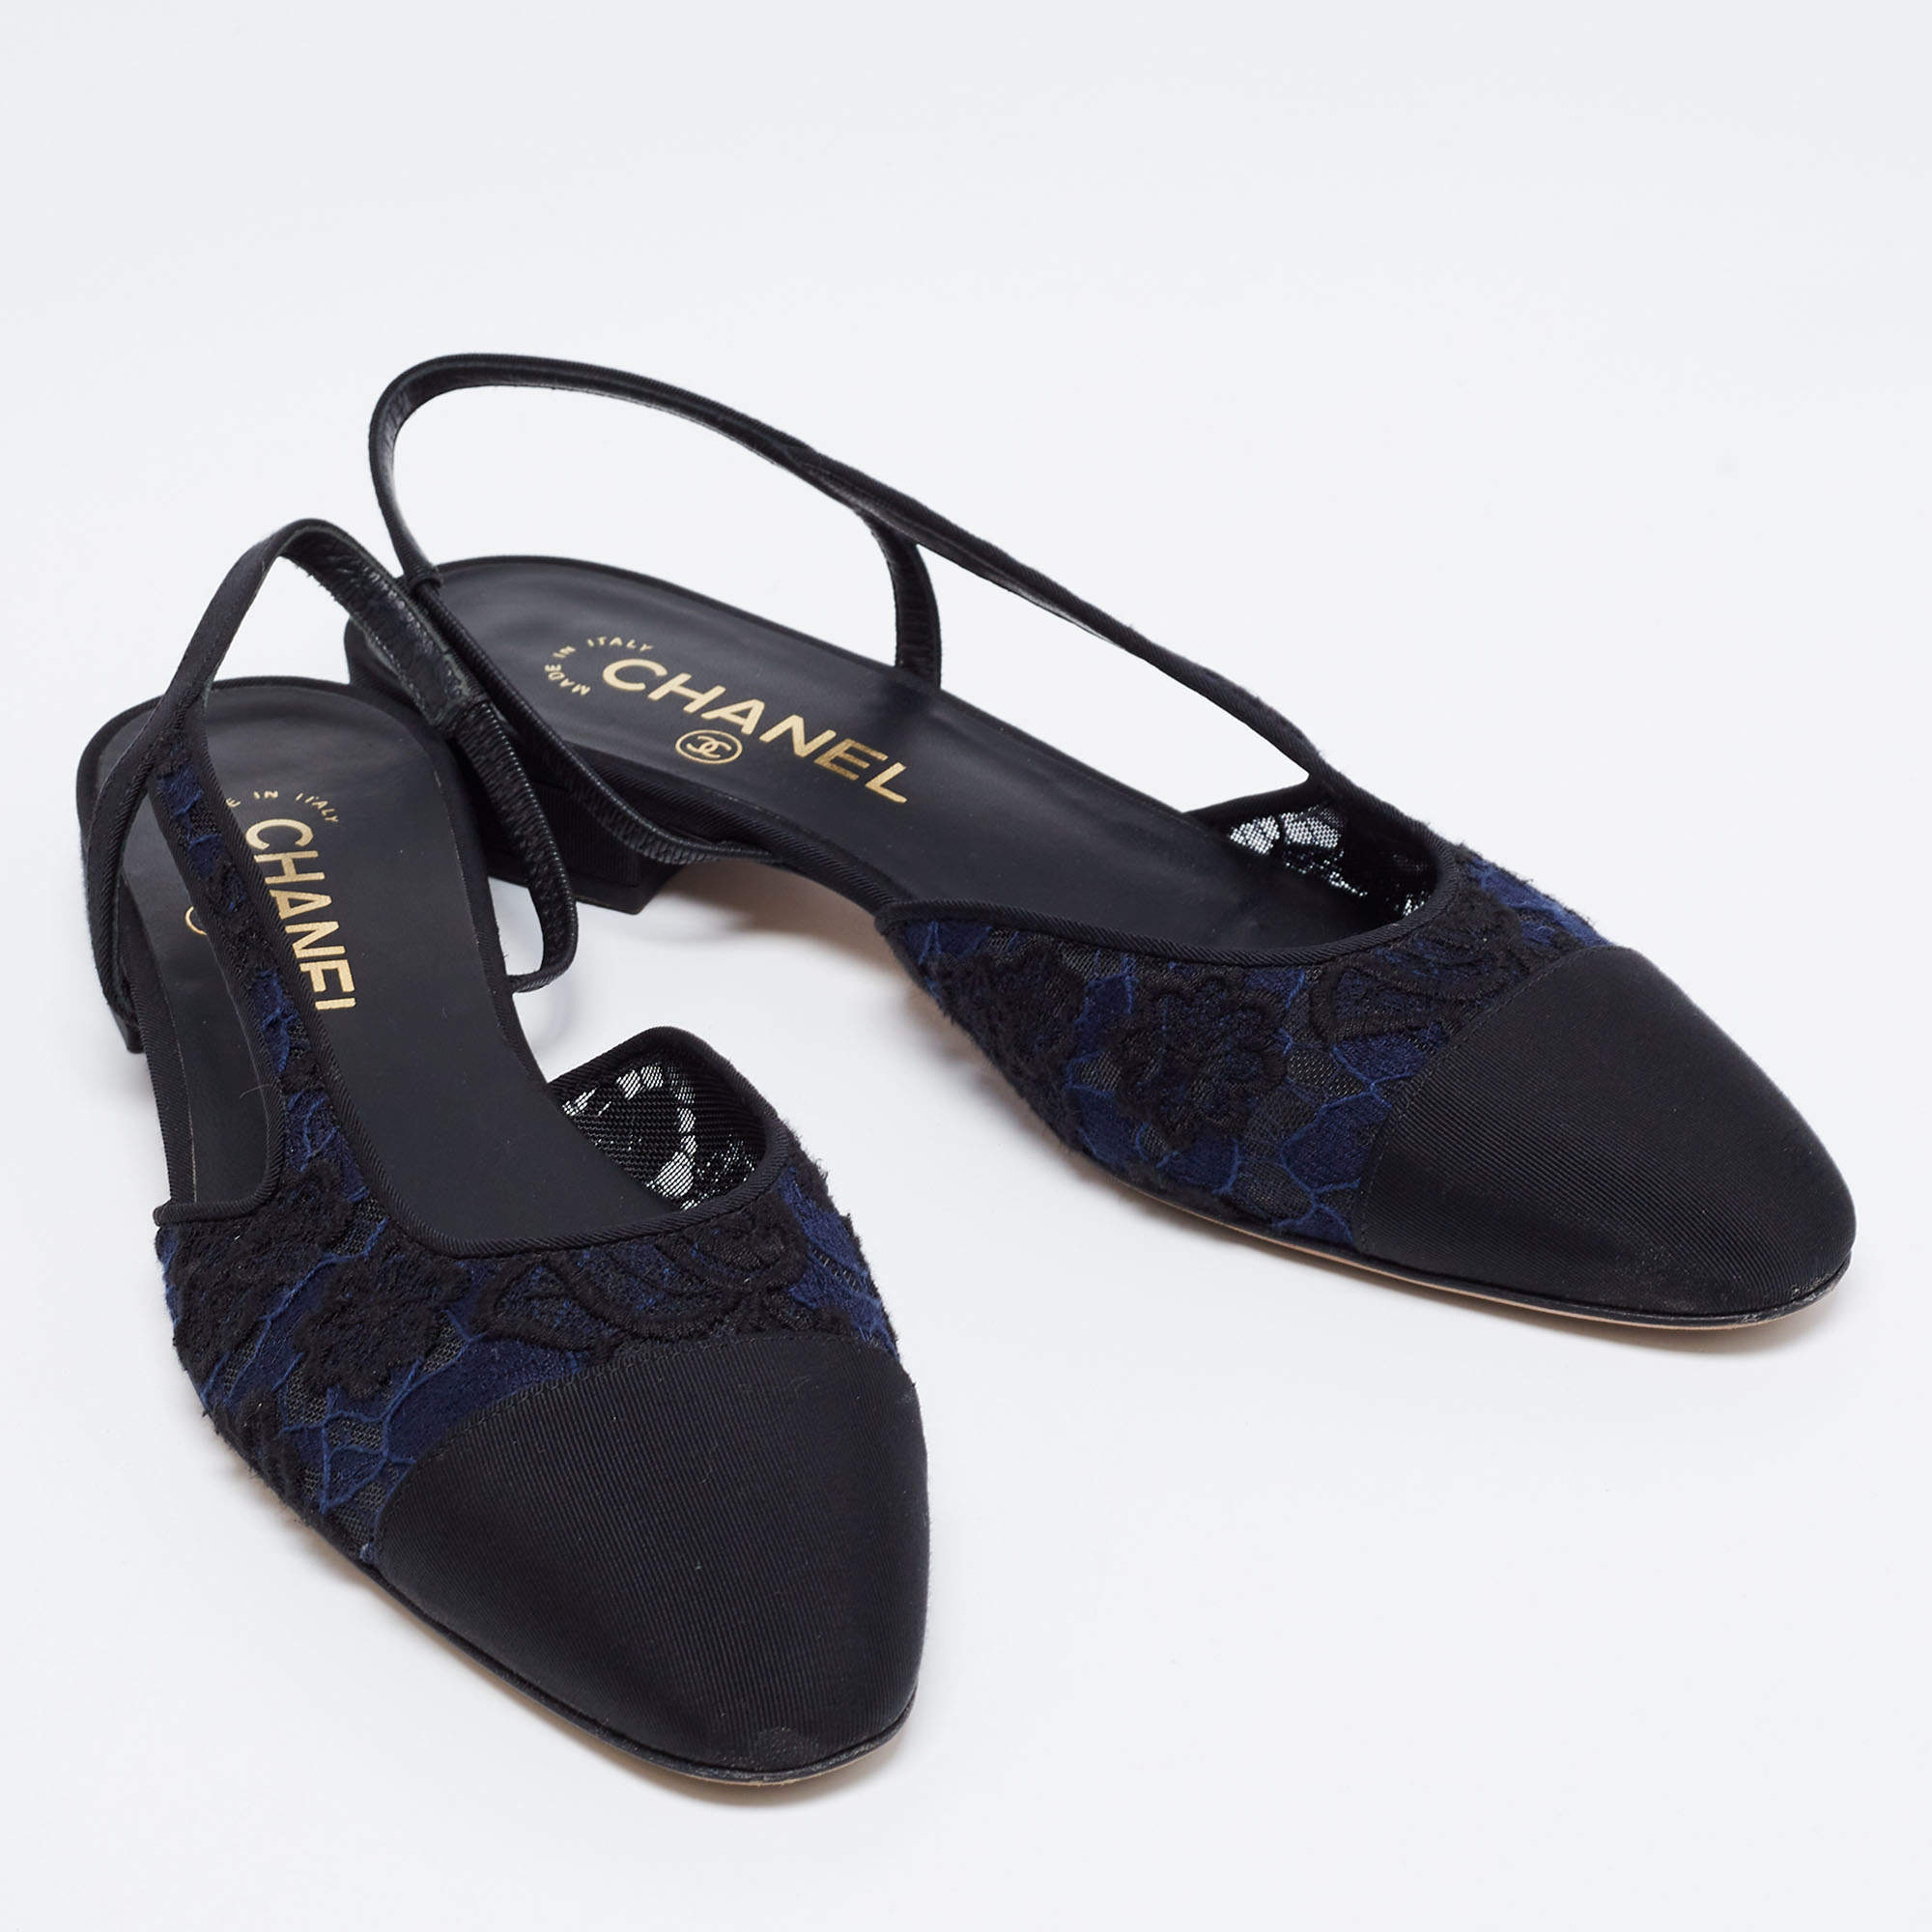 Chanel Black/Blue Lace and Fabric Cap-Toe Slingback Flats Size